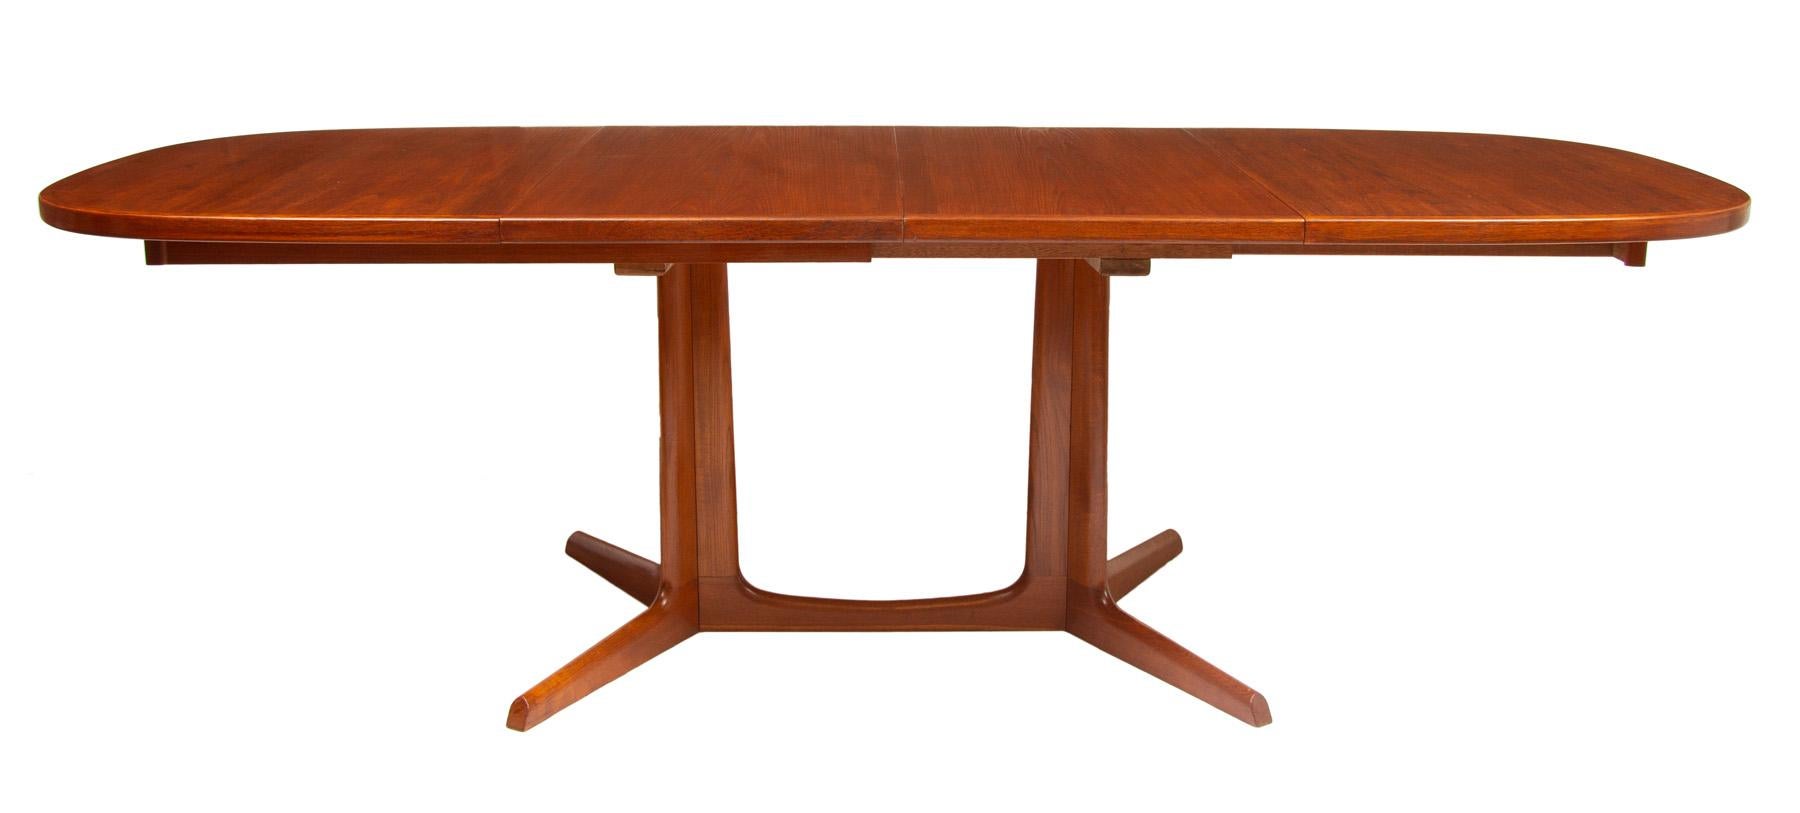 20th Century Midcentury Teak Extending Dining Table by Niels O.Moller for Gudme Mobelfabrik For Sale